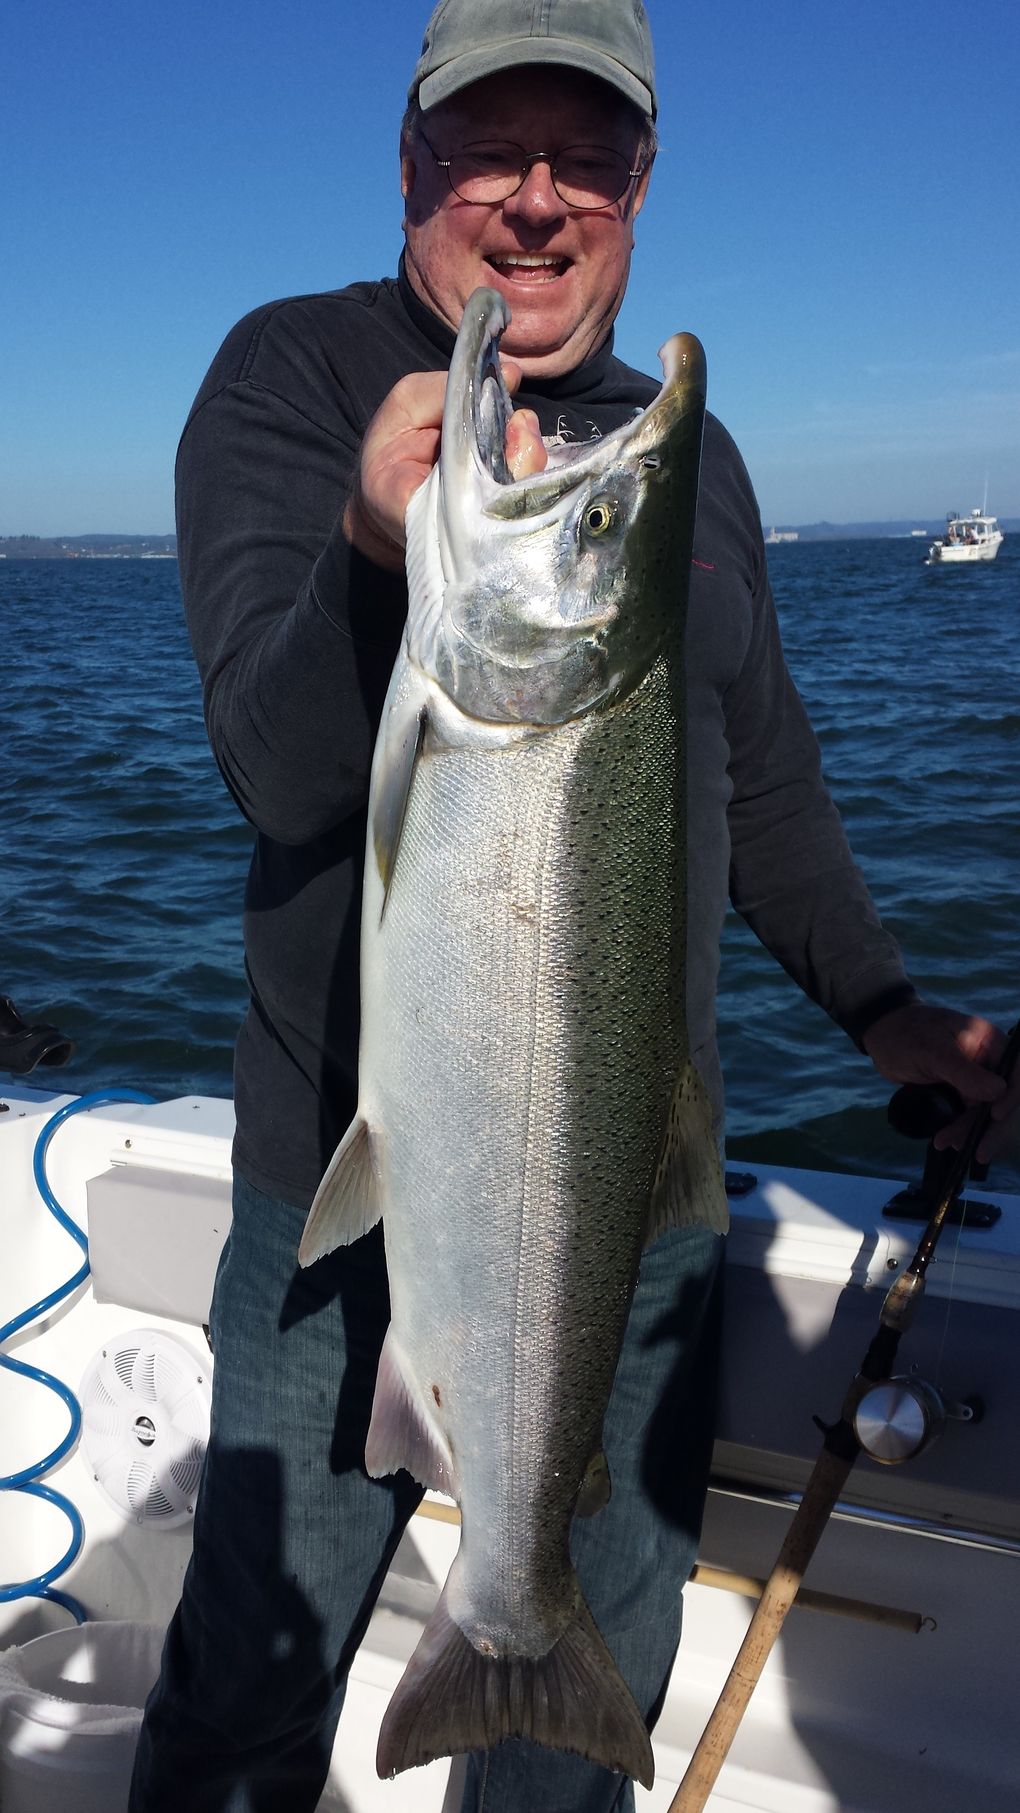 Three ocean salmon fishing options approved, and looks to ...